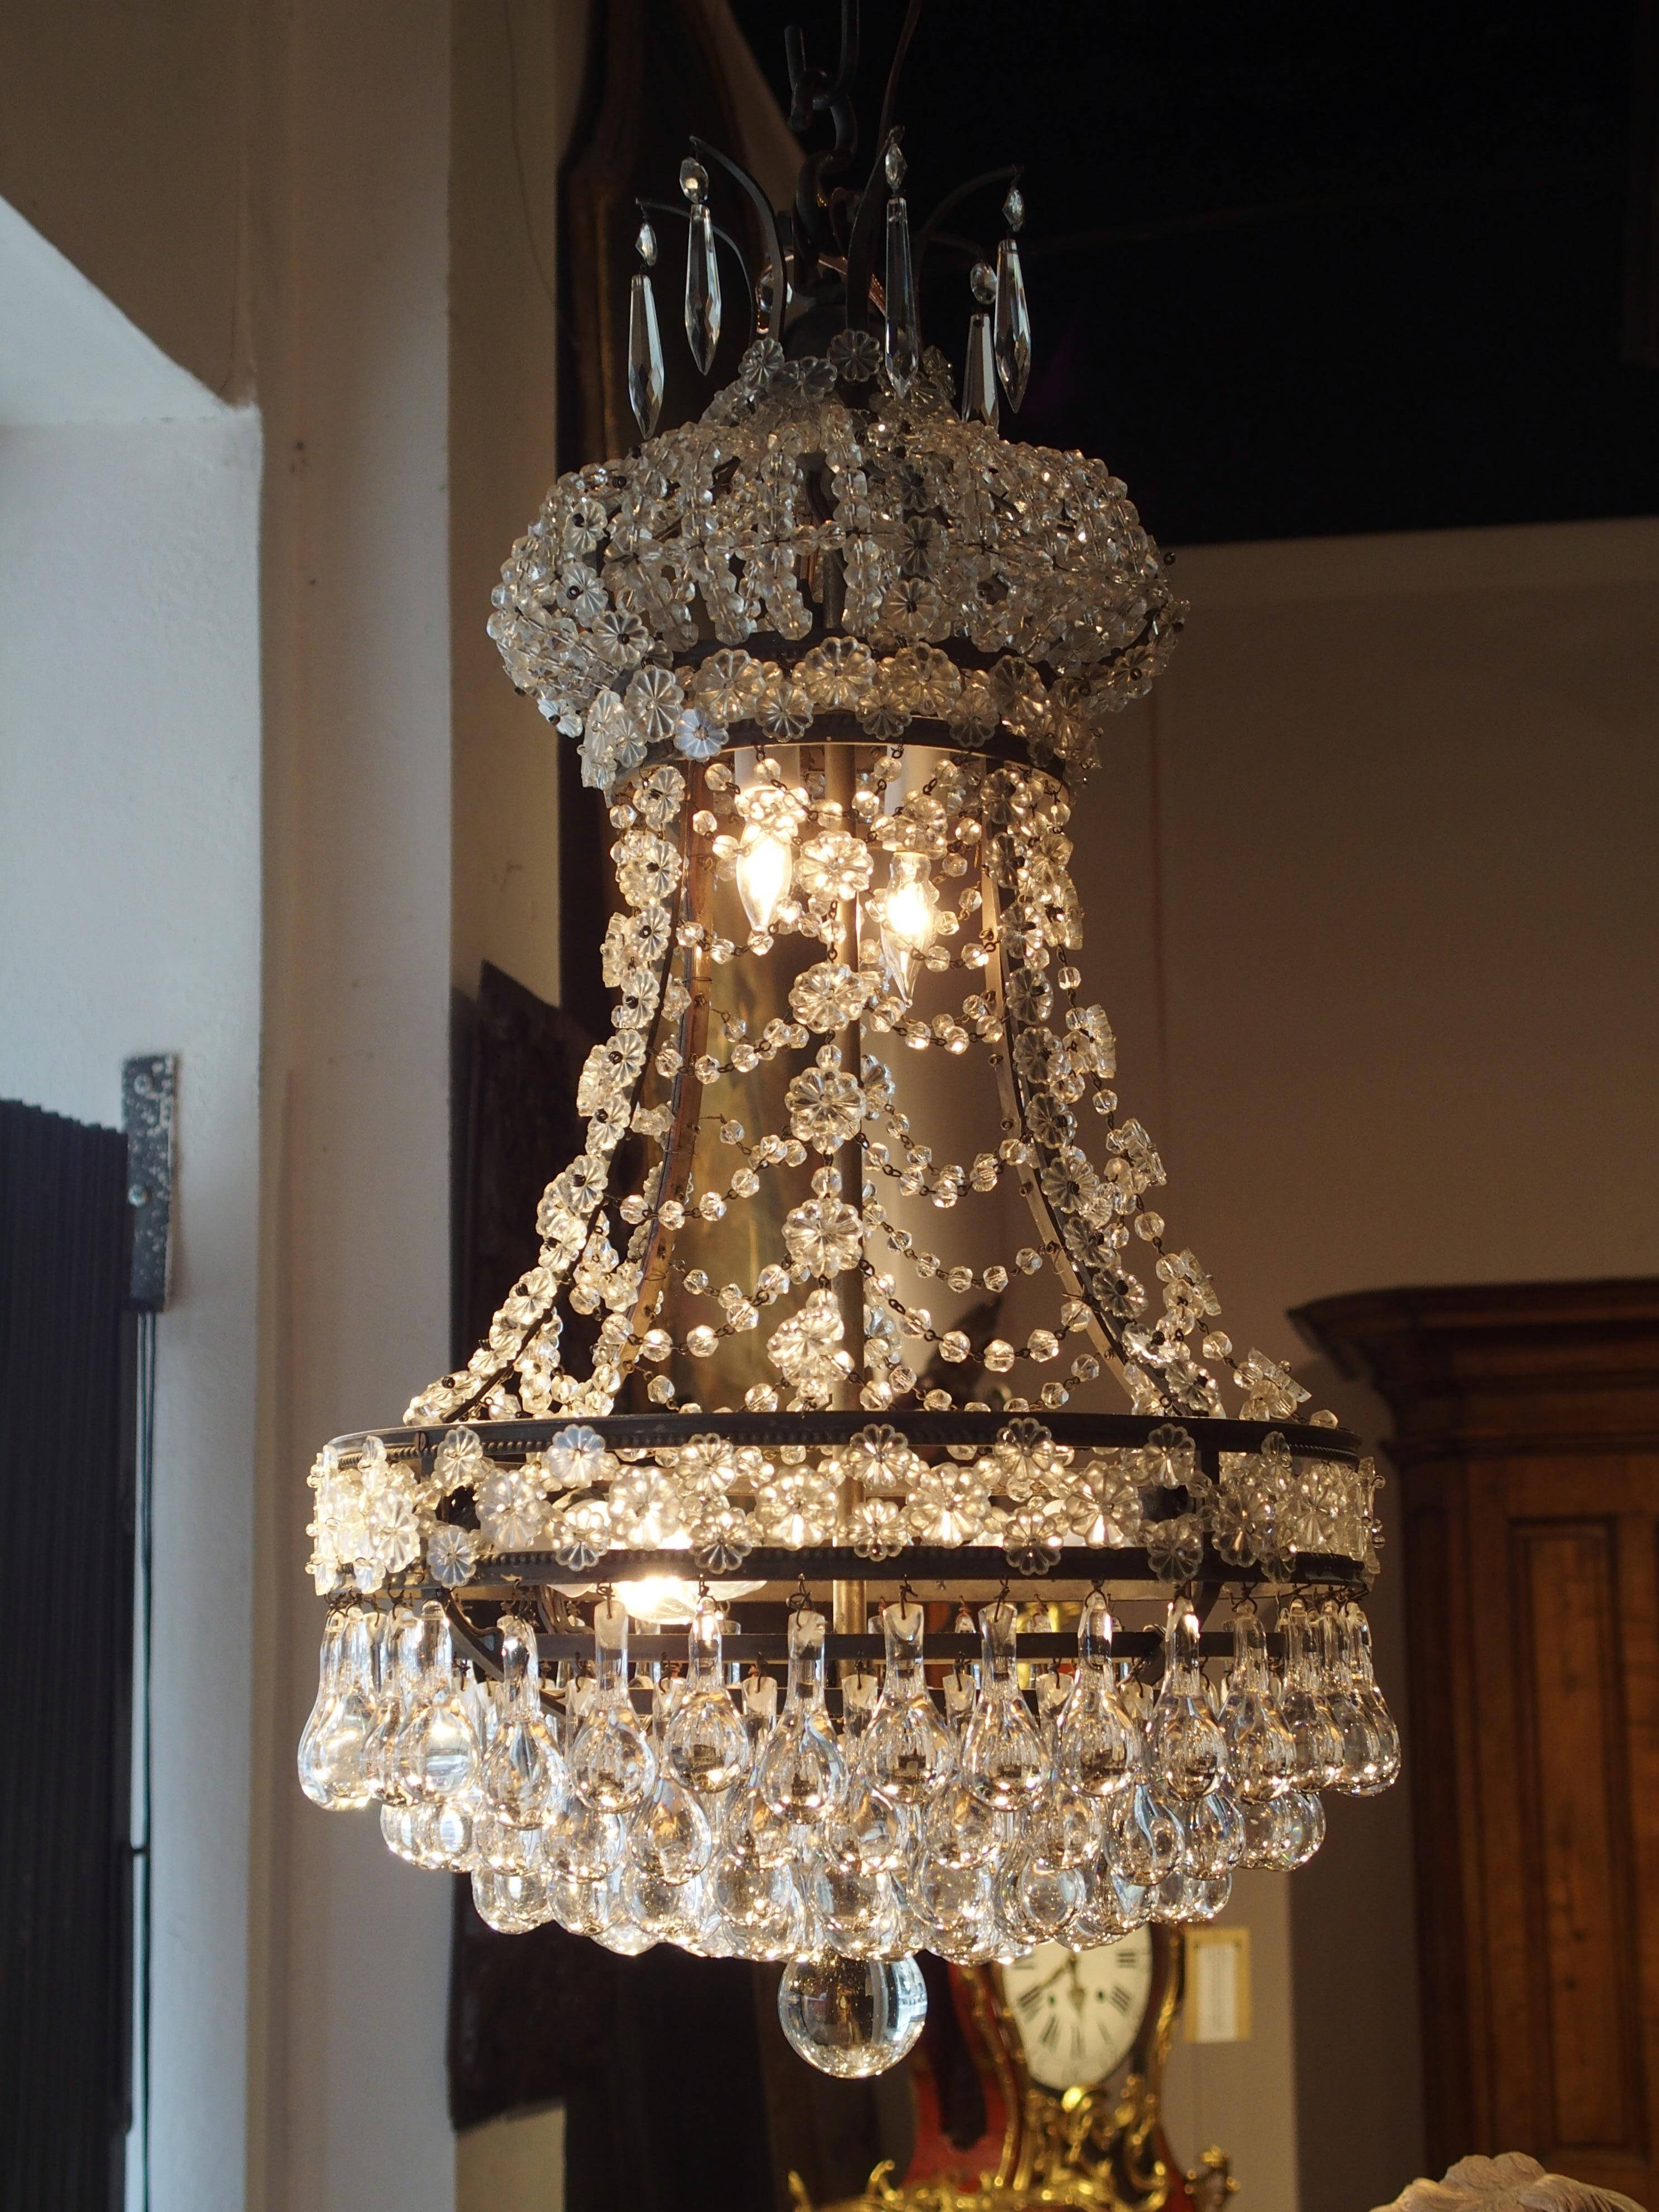 This small Louis XVI style crystal chandelier was made in France during the latter part of the 19th century. The lovely chandelier has four lights in the base and two in the canopy. The crystal pendeloques have been arranged to elegantly reflect the